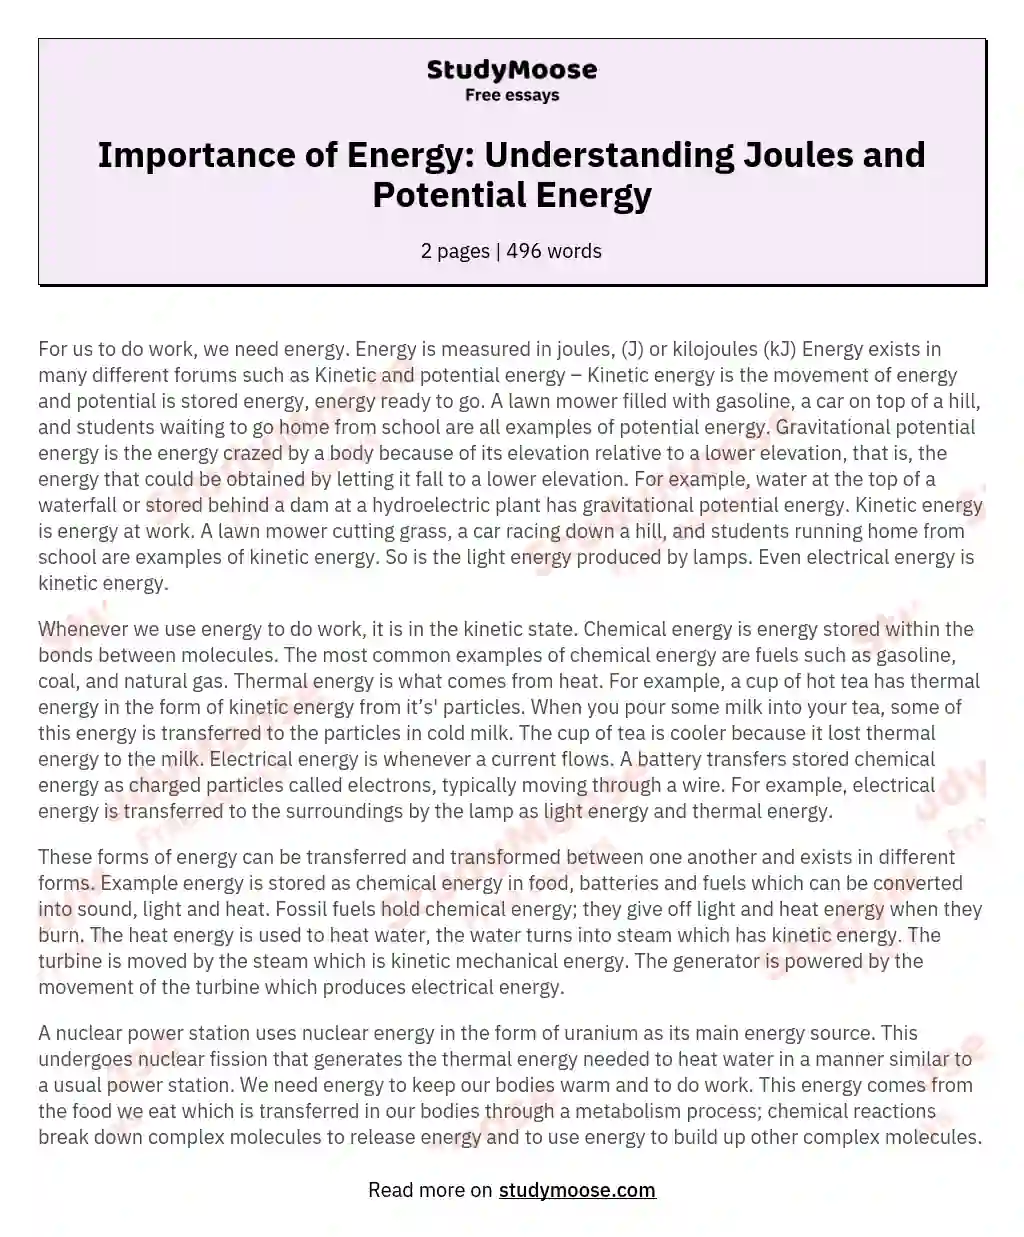 Importance of Energy: Understanding Joules and Potential Energy essay